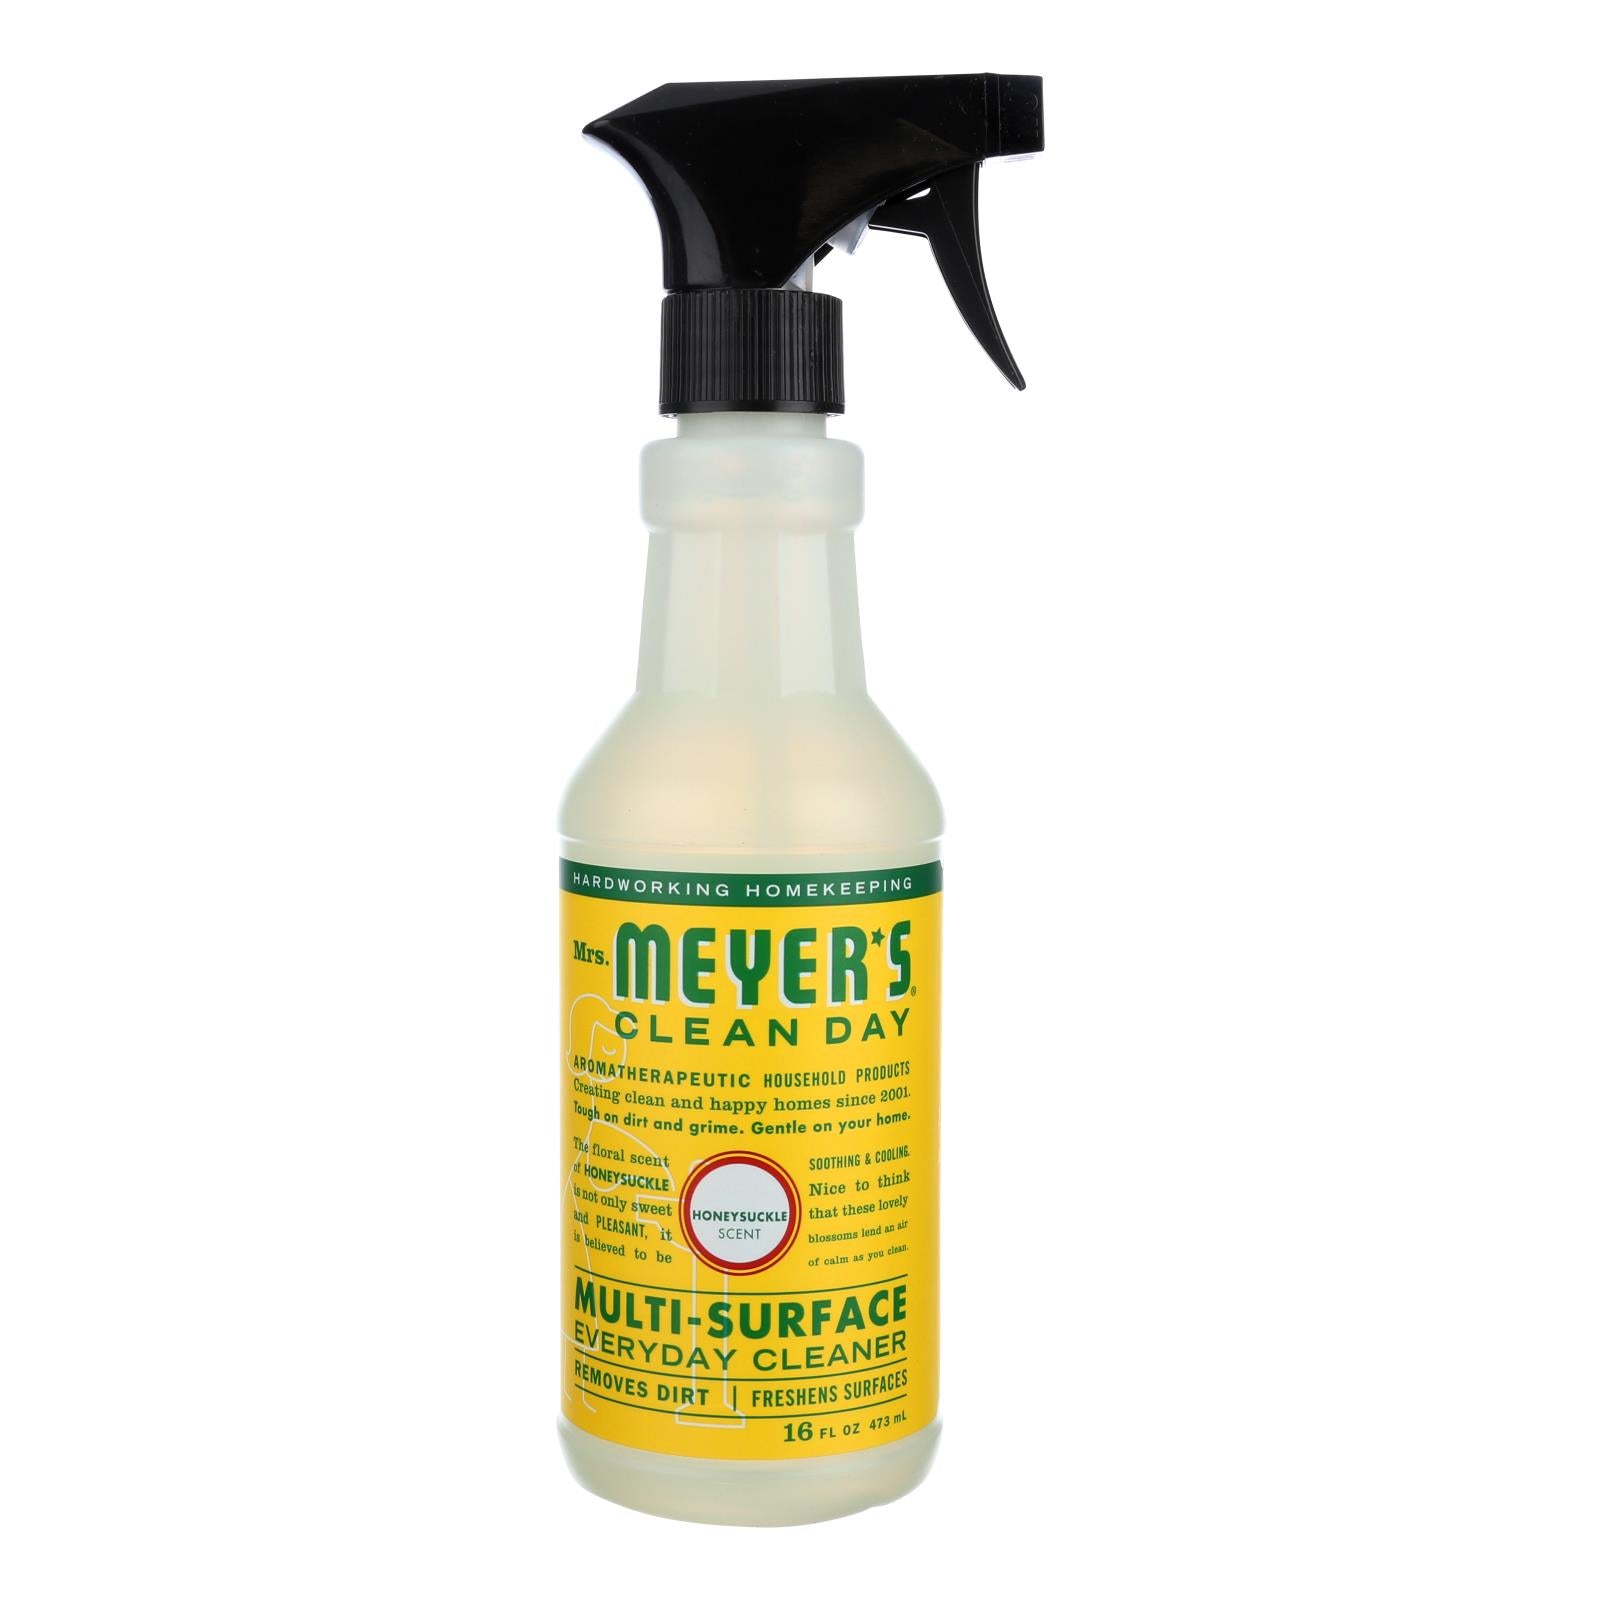 Mrs. Meyer's Clean Day - Multi-surface Everyday Cleaner - Honeysuckle - 16 Fl Oz - Case Of 6